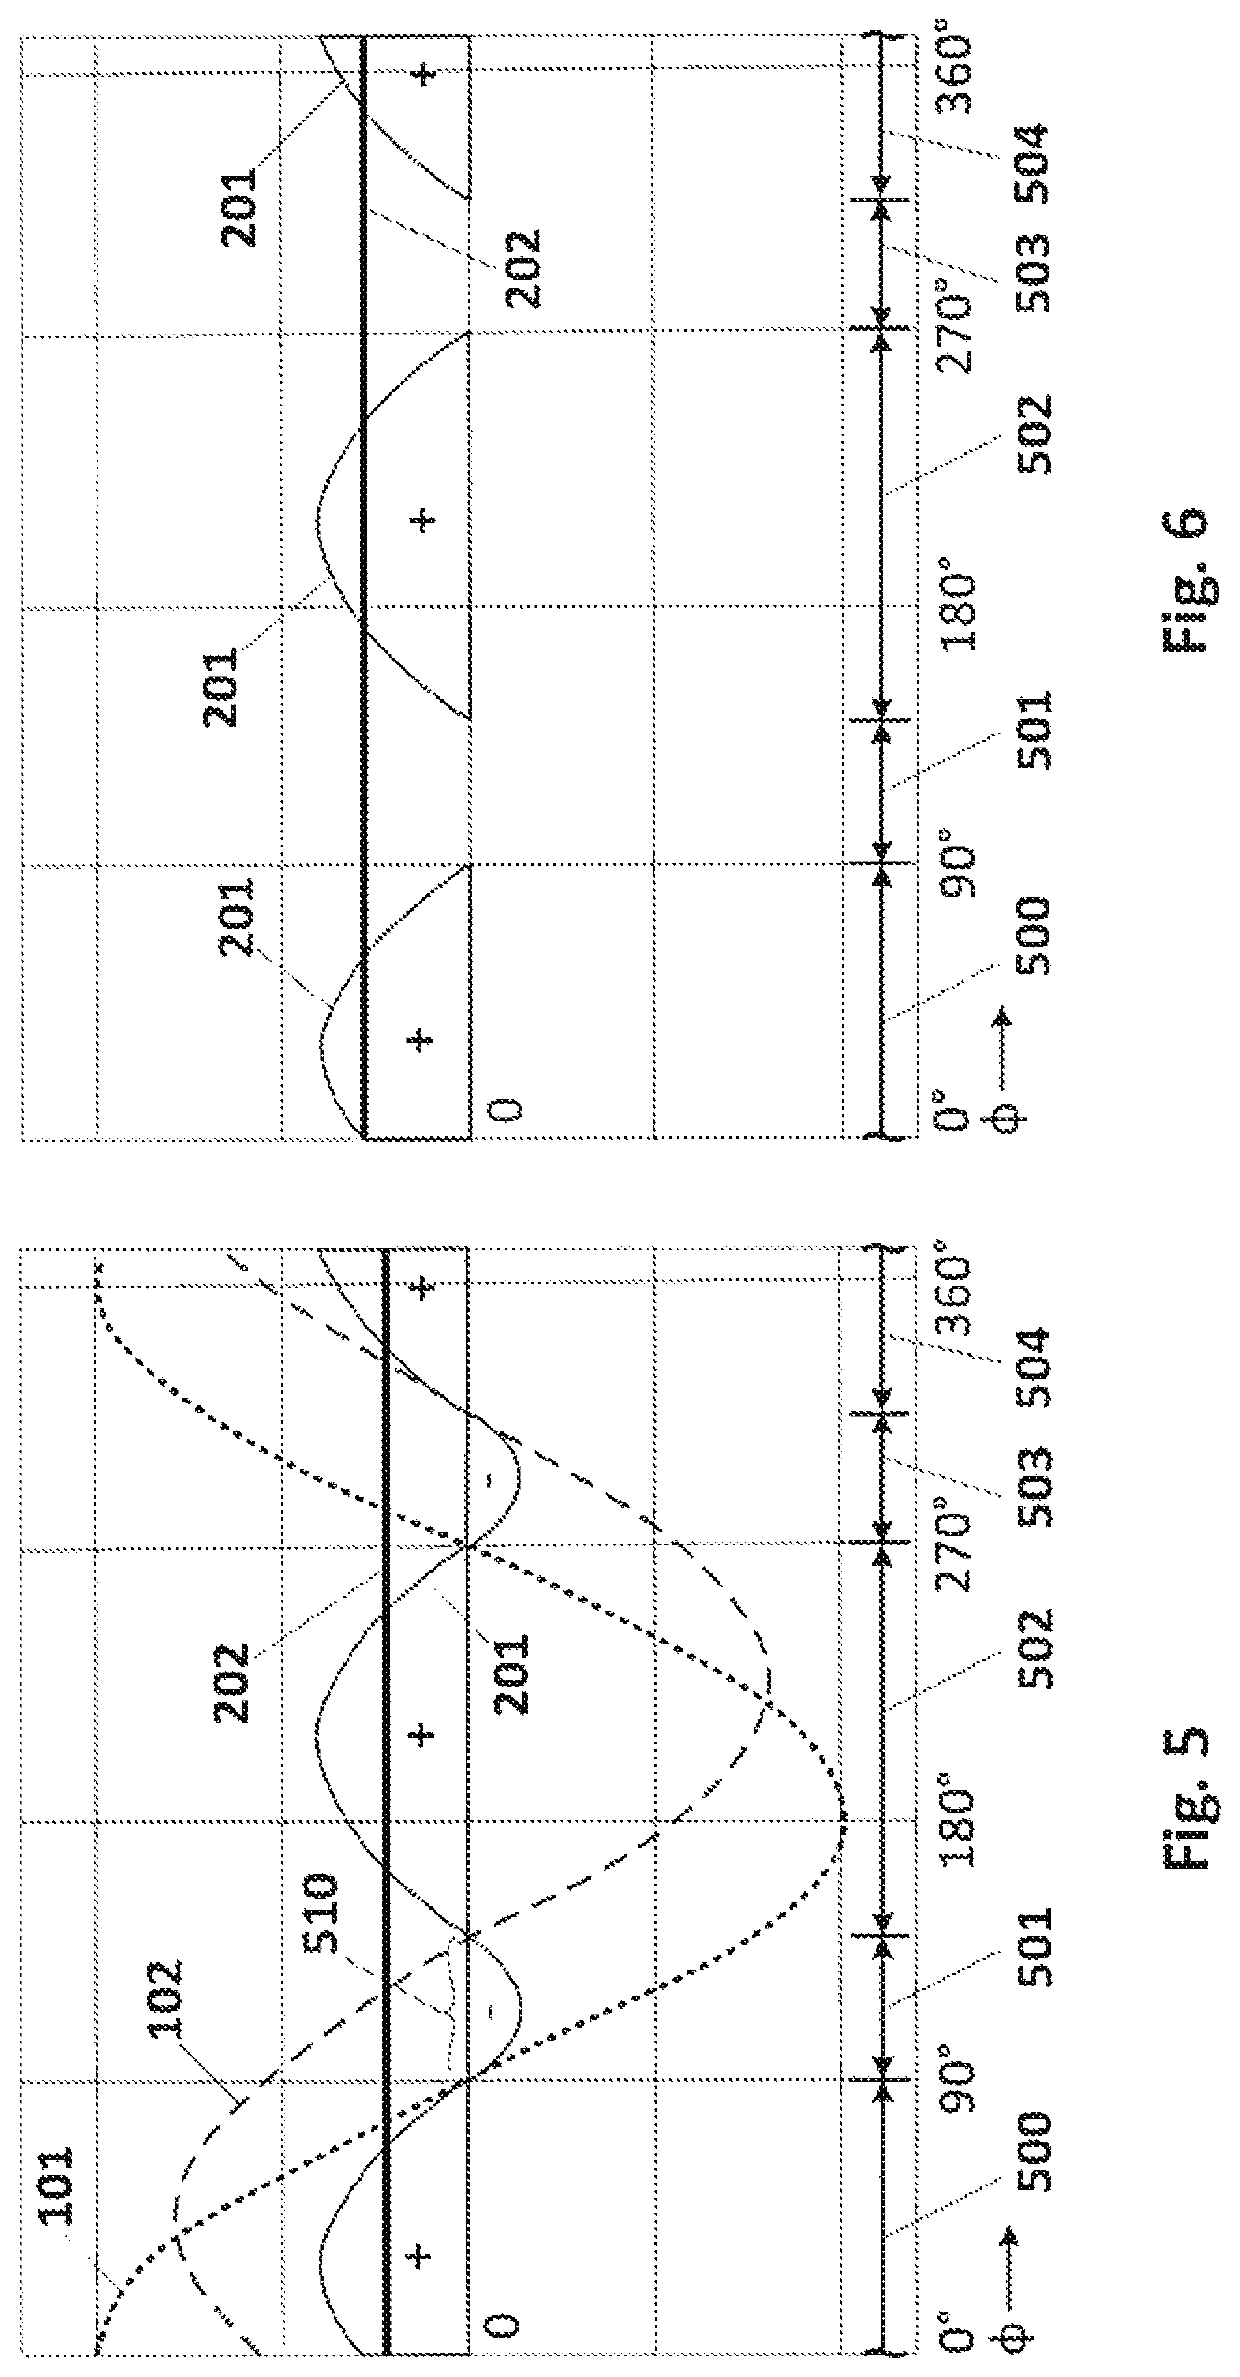 Device and process for detecting and mitigating reverse power-flow